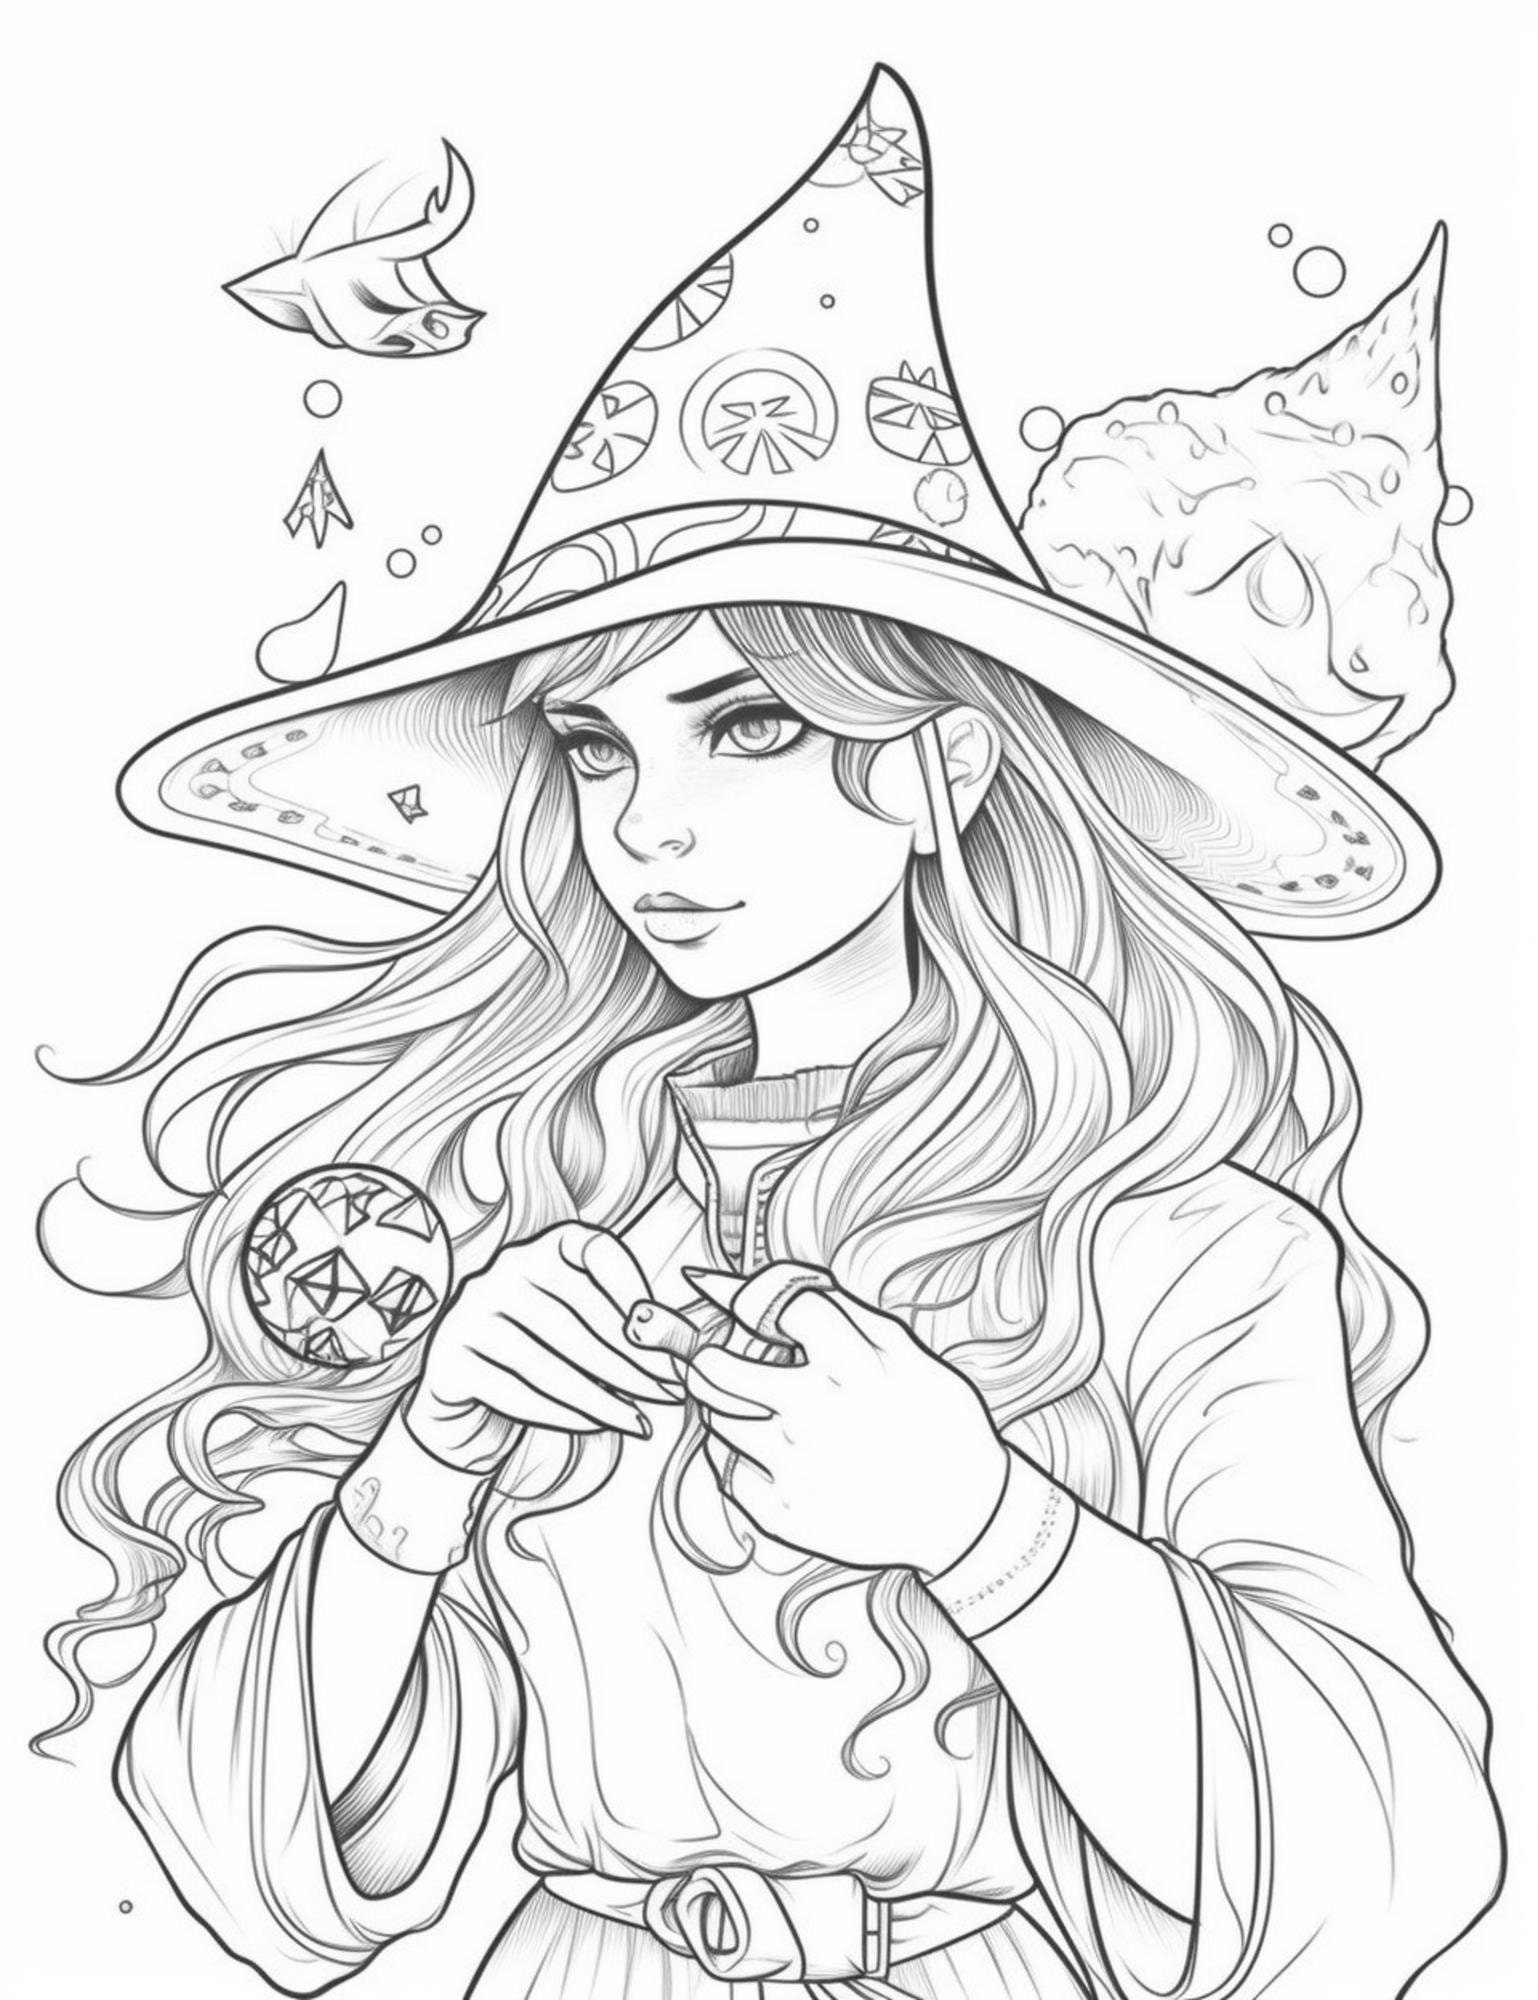 Halloween Coloring Set With Beautiful Witch Girls In Costumes